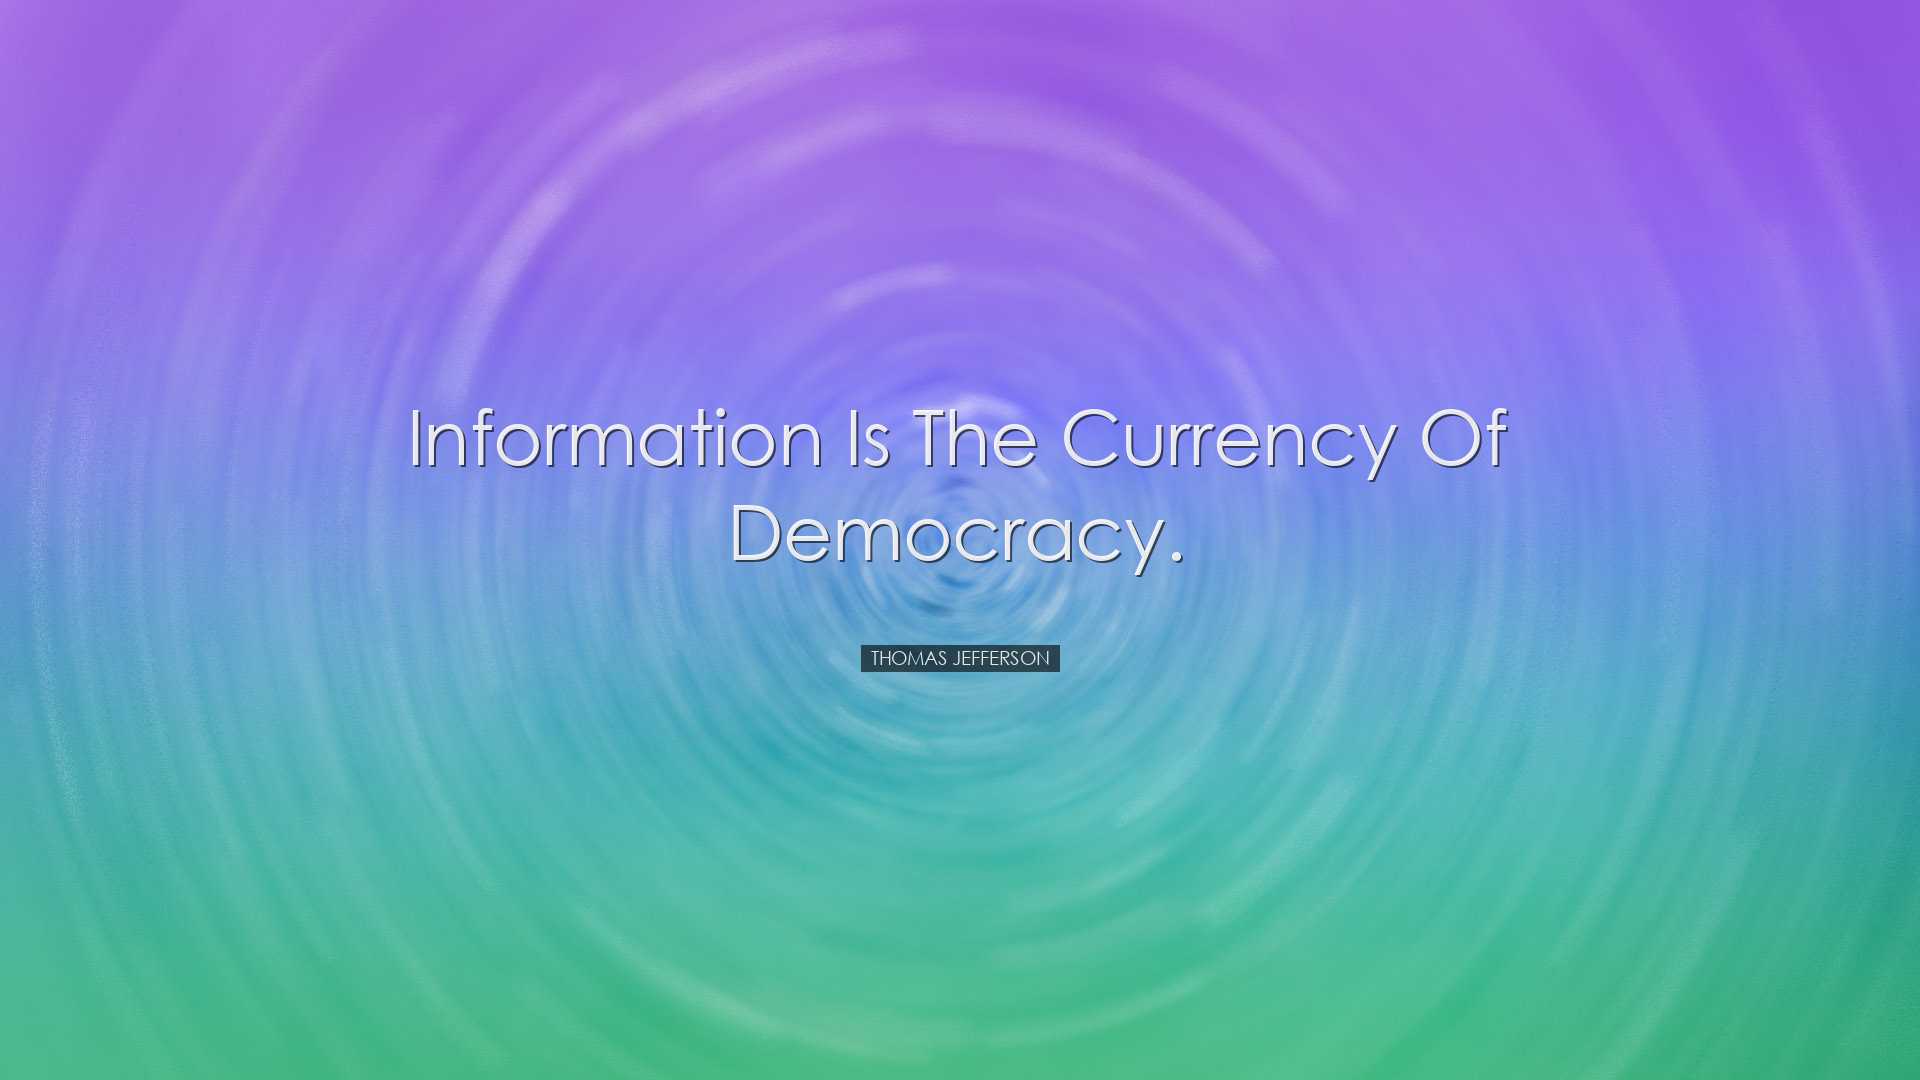 Information is the currency of democracy. - Thomas Jefferson